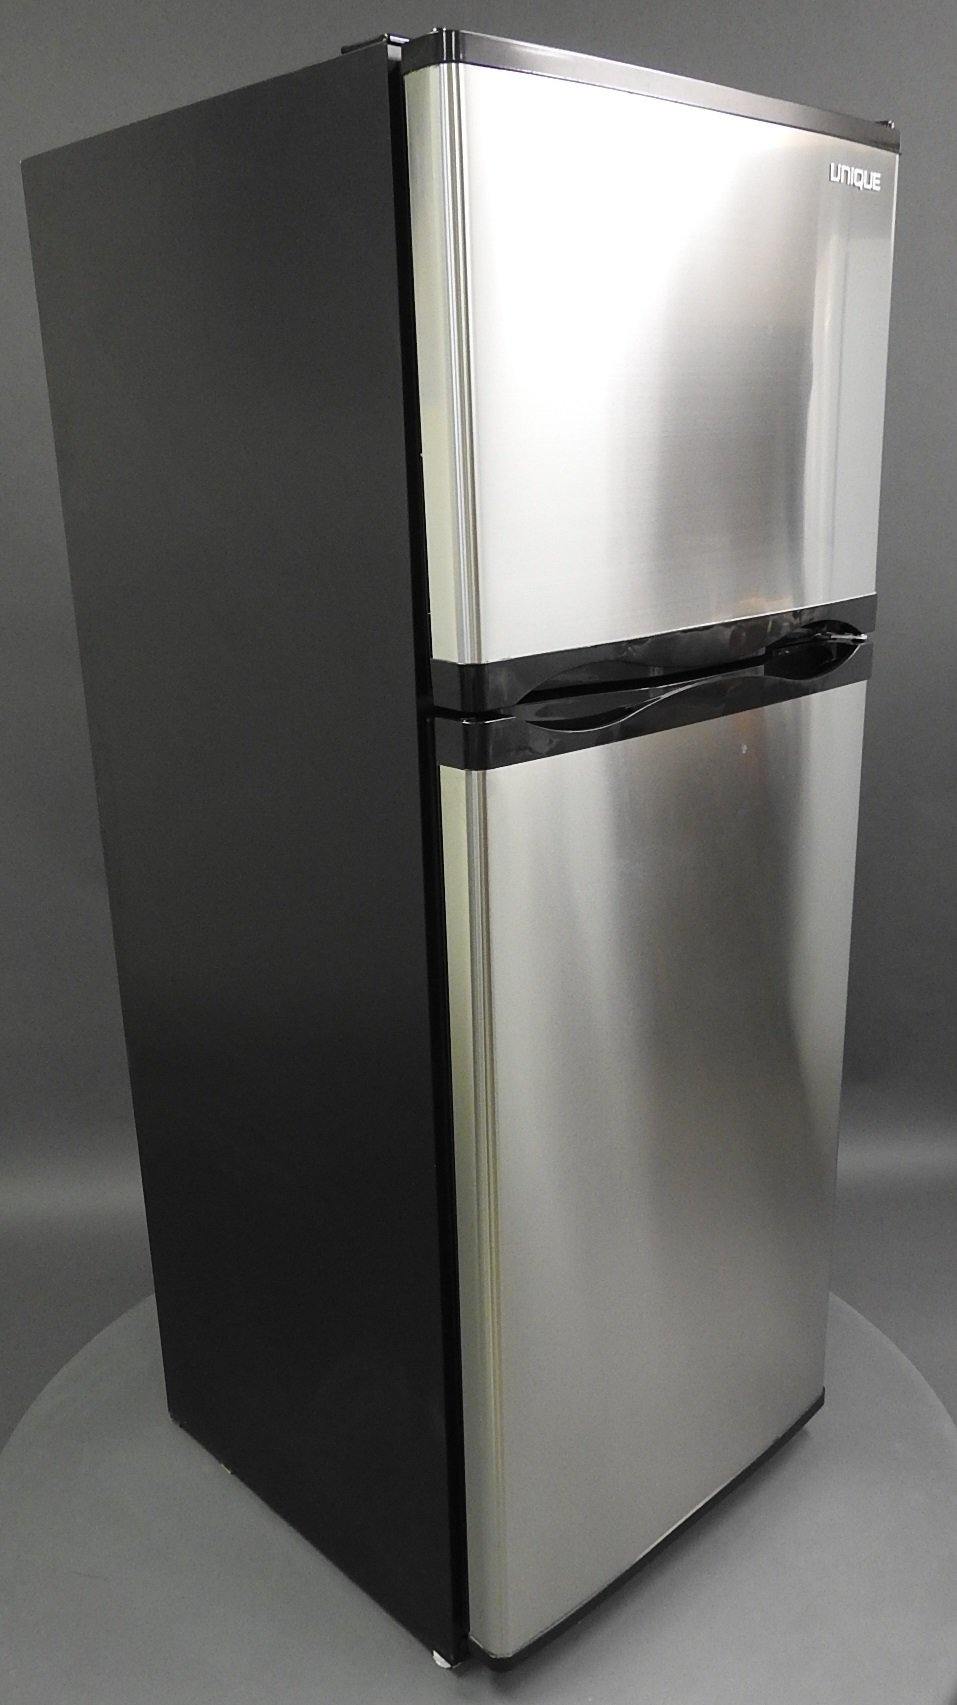 Check out this beautiful 10 cubic foot solar refrigerator freezer from Unique, the UGP-290l - Ben's Discount Supply